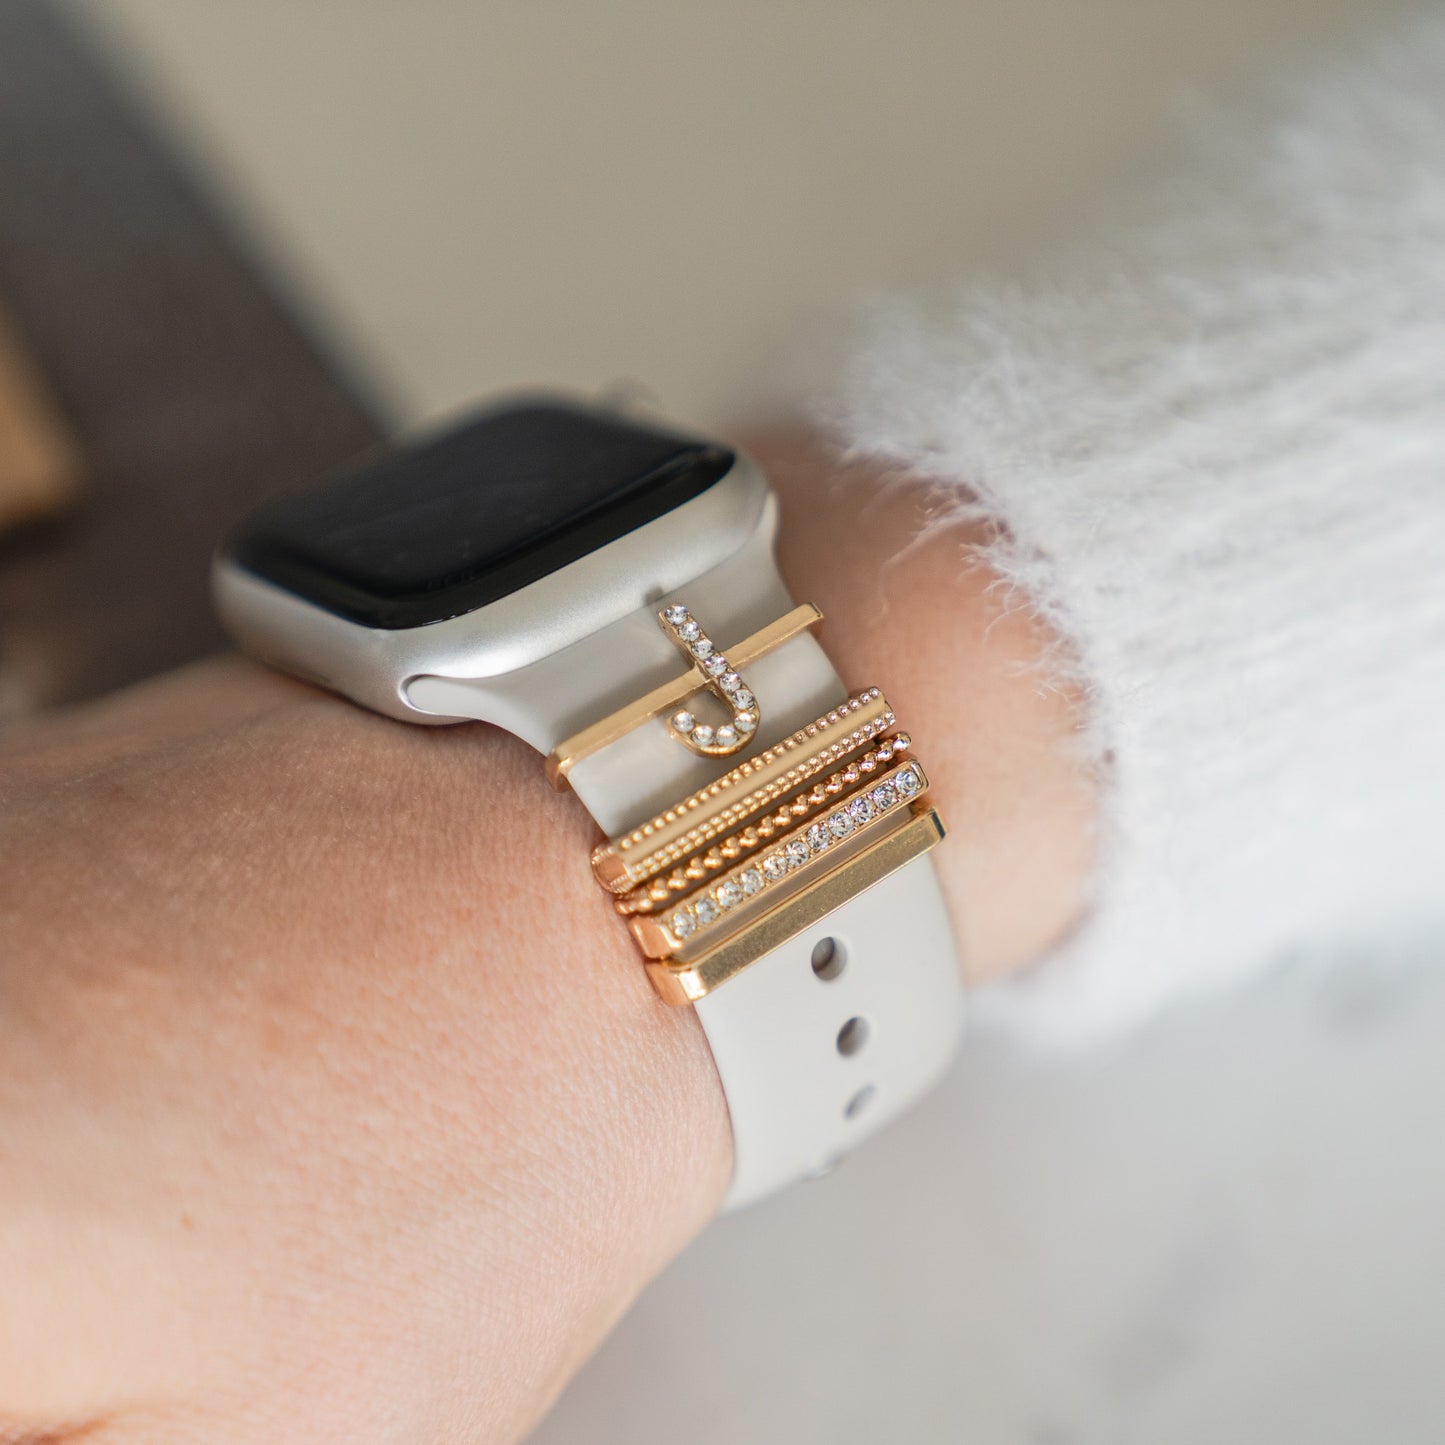 arktisband Apple Watch Charms "J Style"